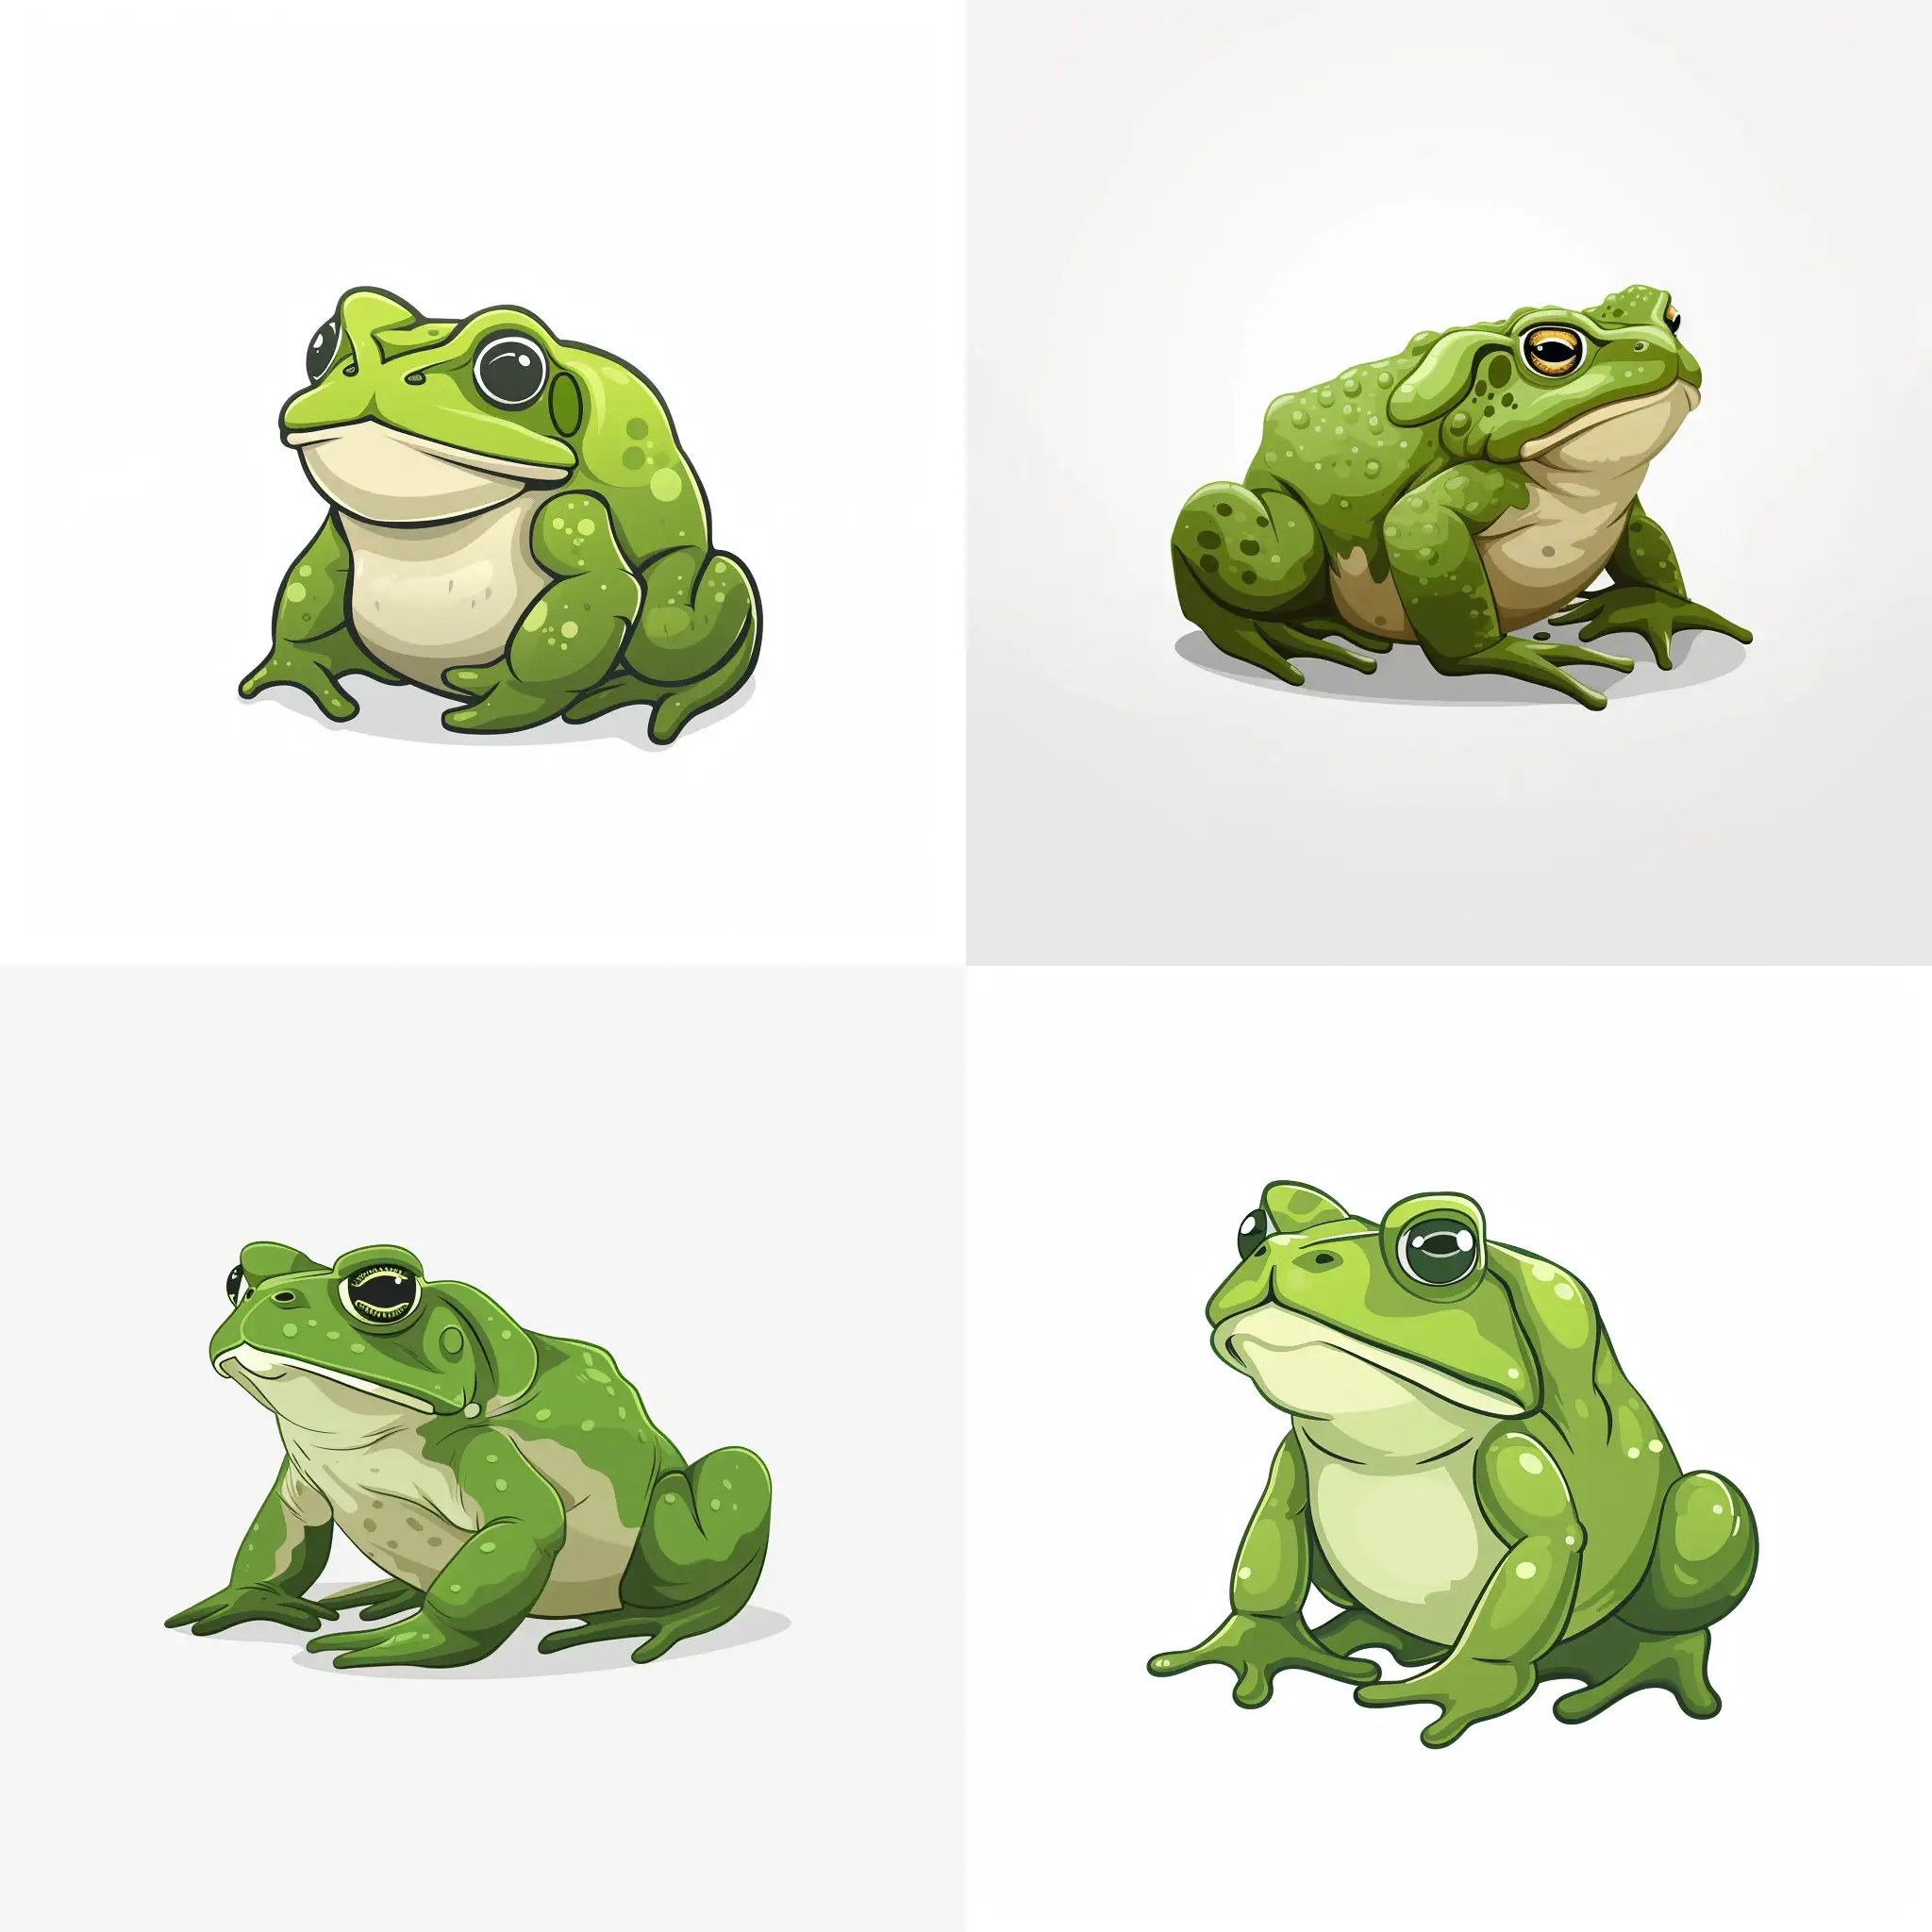 Whimsical-Cartoon-Green-Toad-Illustration-on-Clean-White-Background